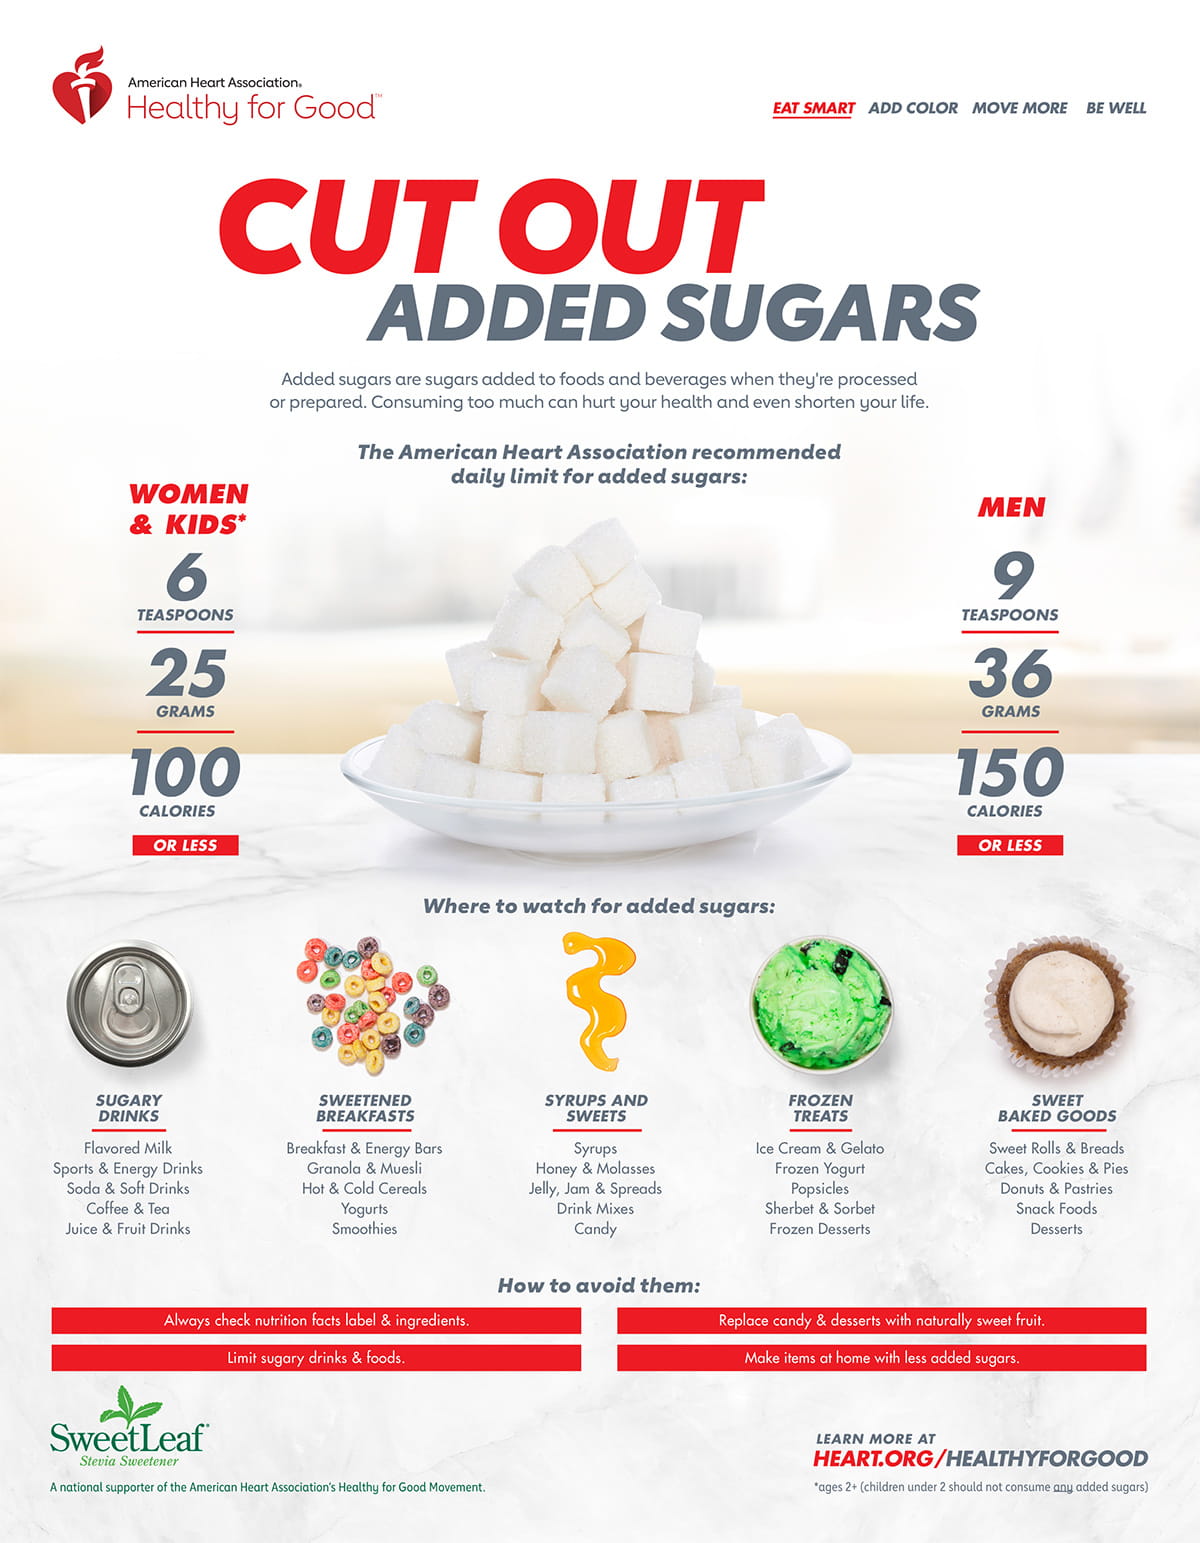 cutting added sugar out of diet